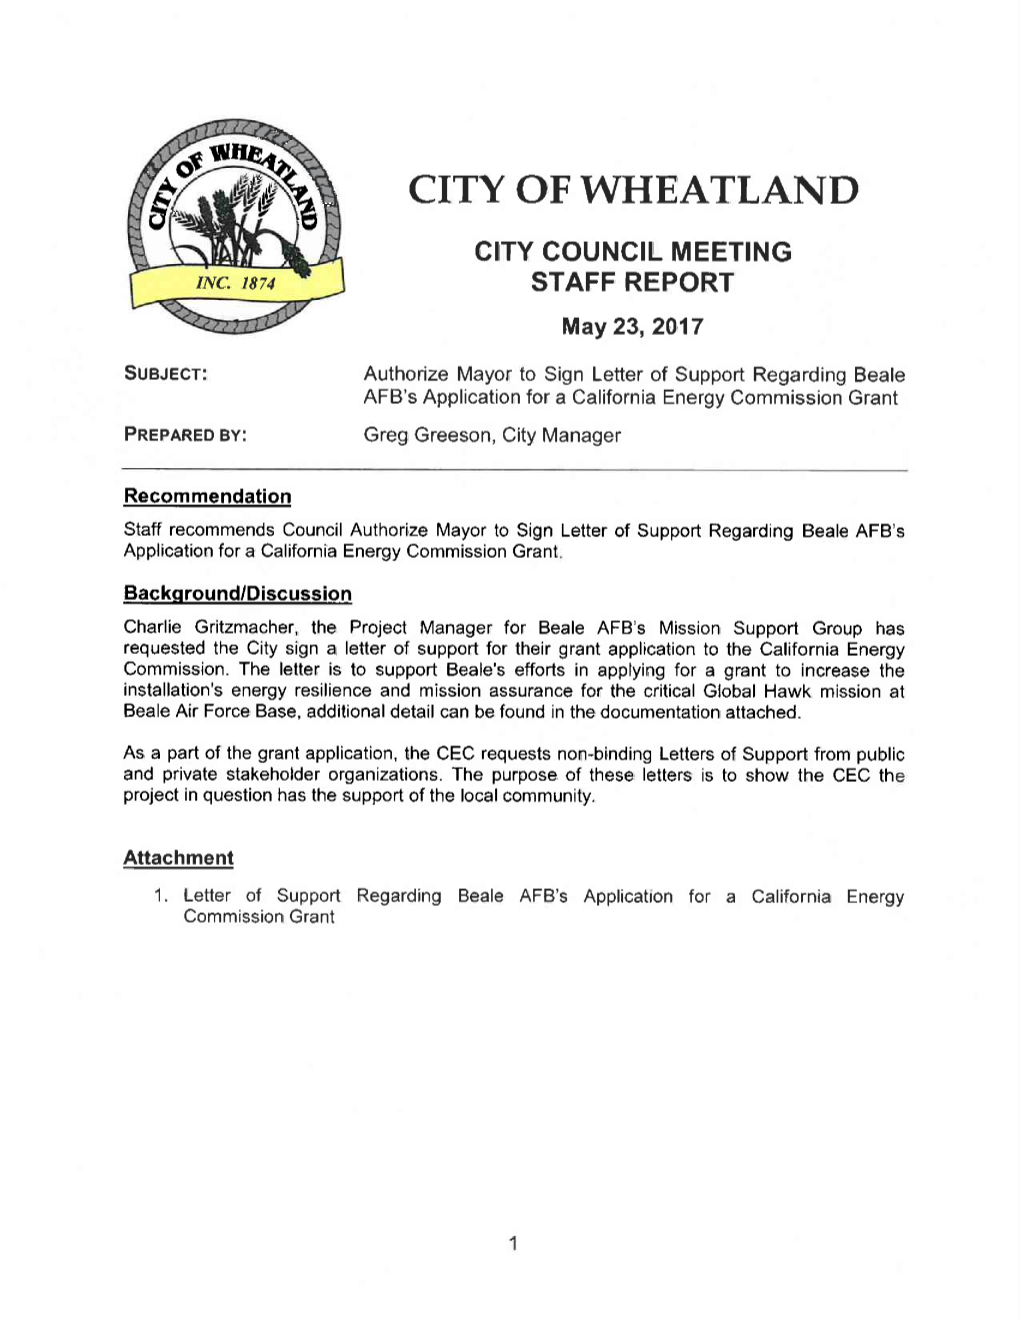 CITY of WHEATLAND CIITY Council MEETING STAFF REPORT